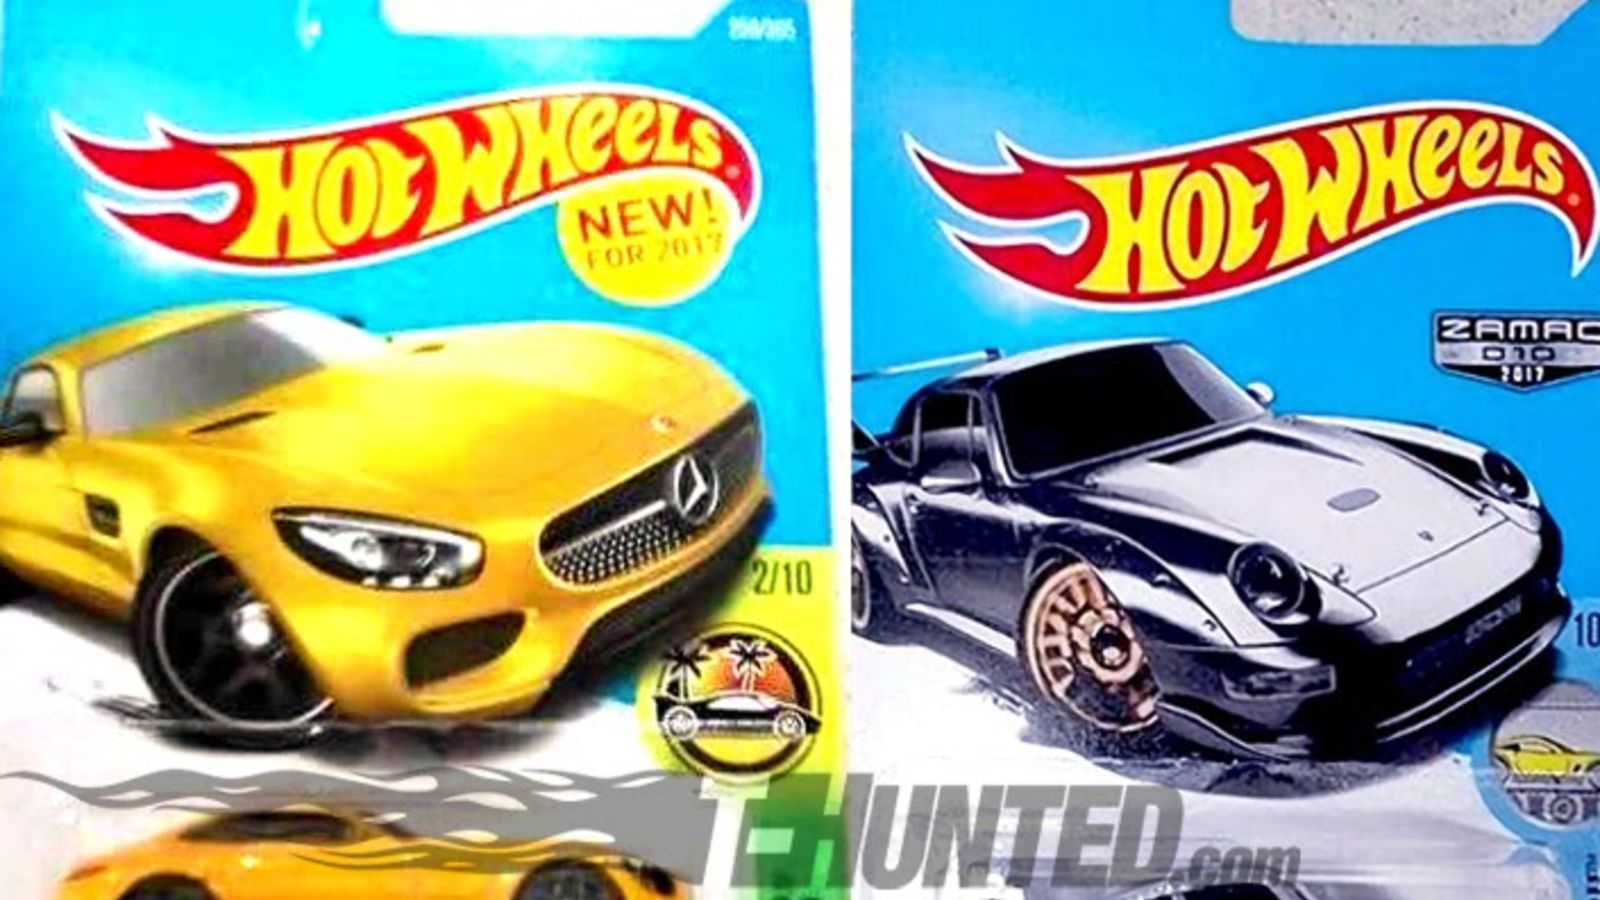 Illustration for article titled Hot Wheels AMG GT again.